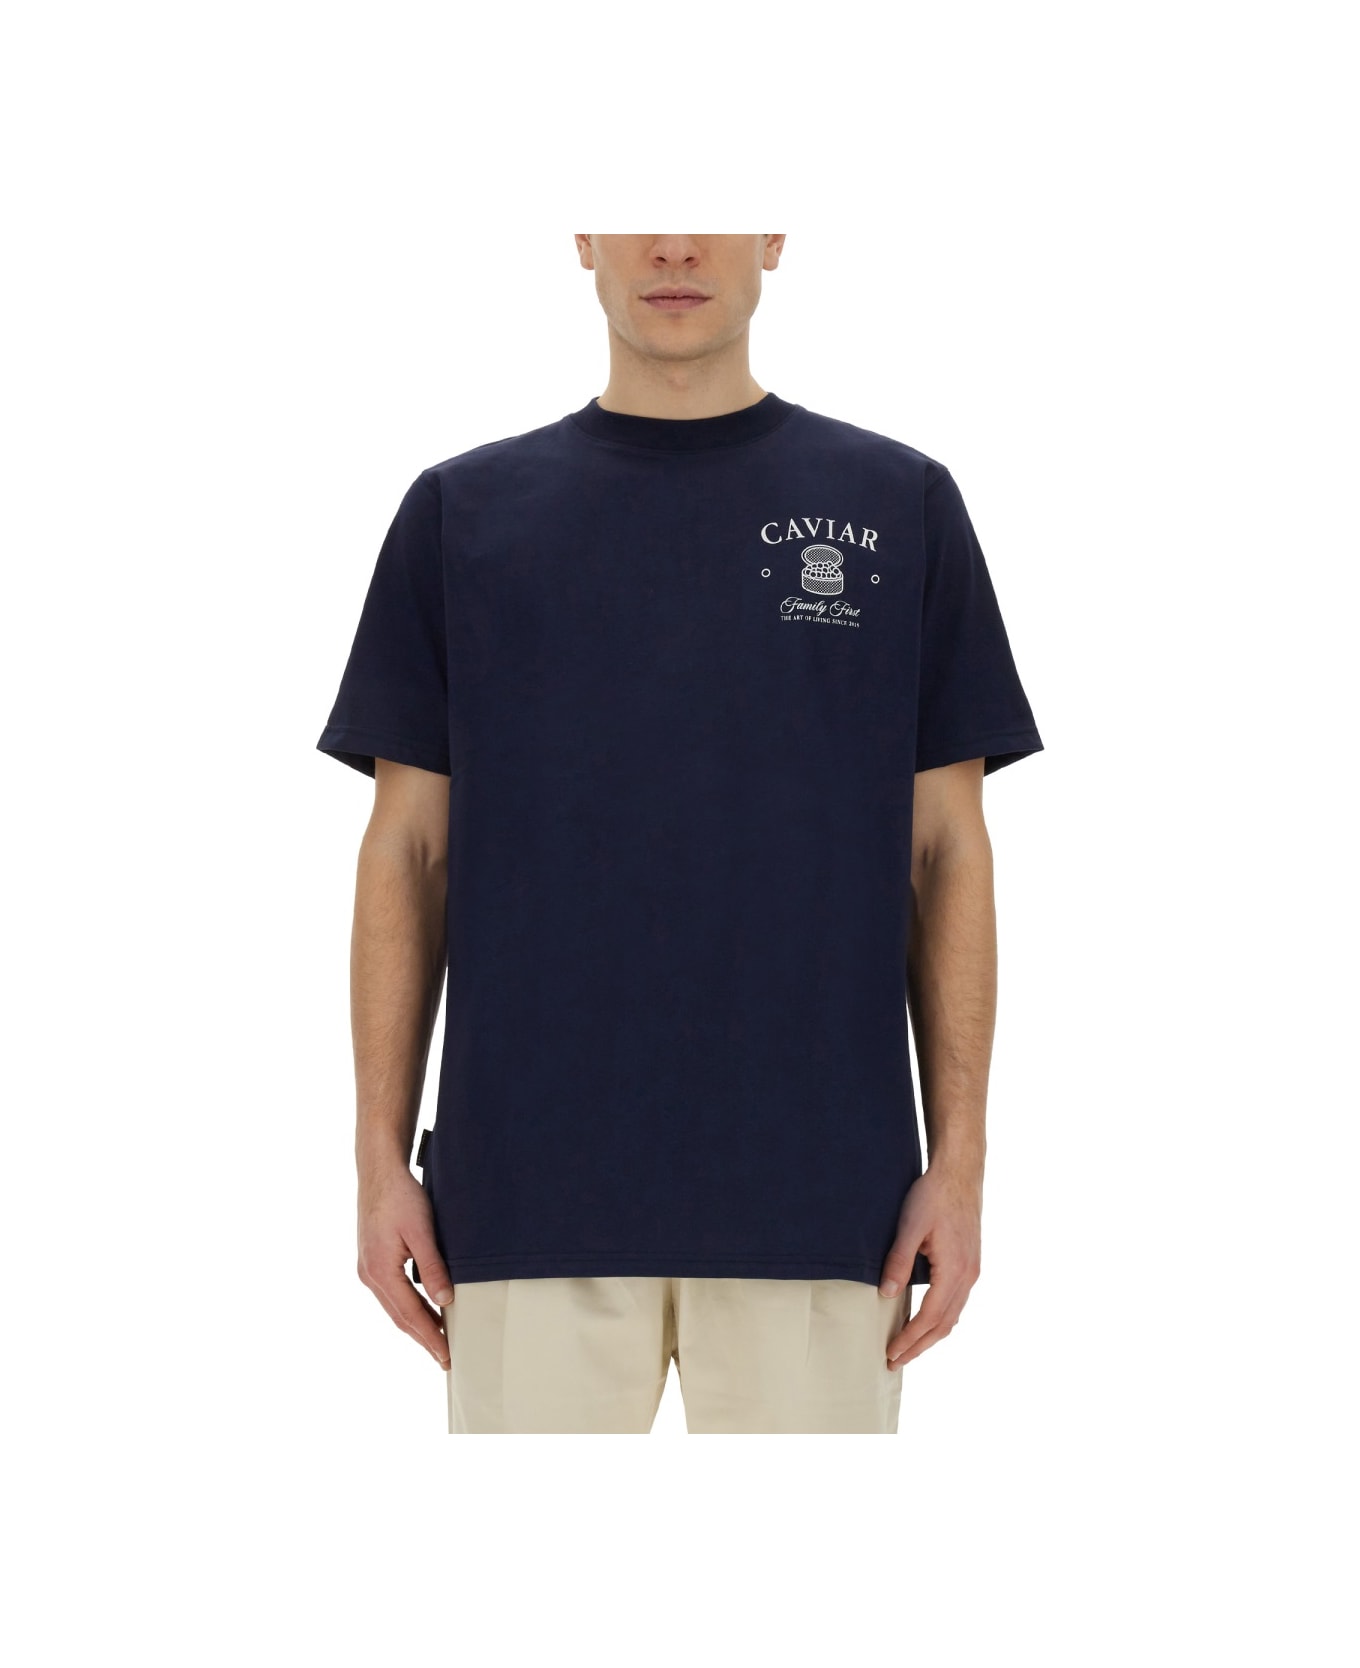 Family First Milano T-shirt With "caviar" Print - BLUE